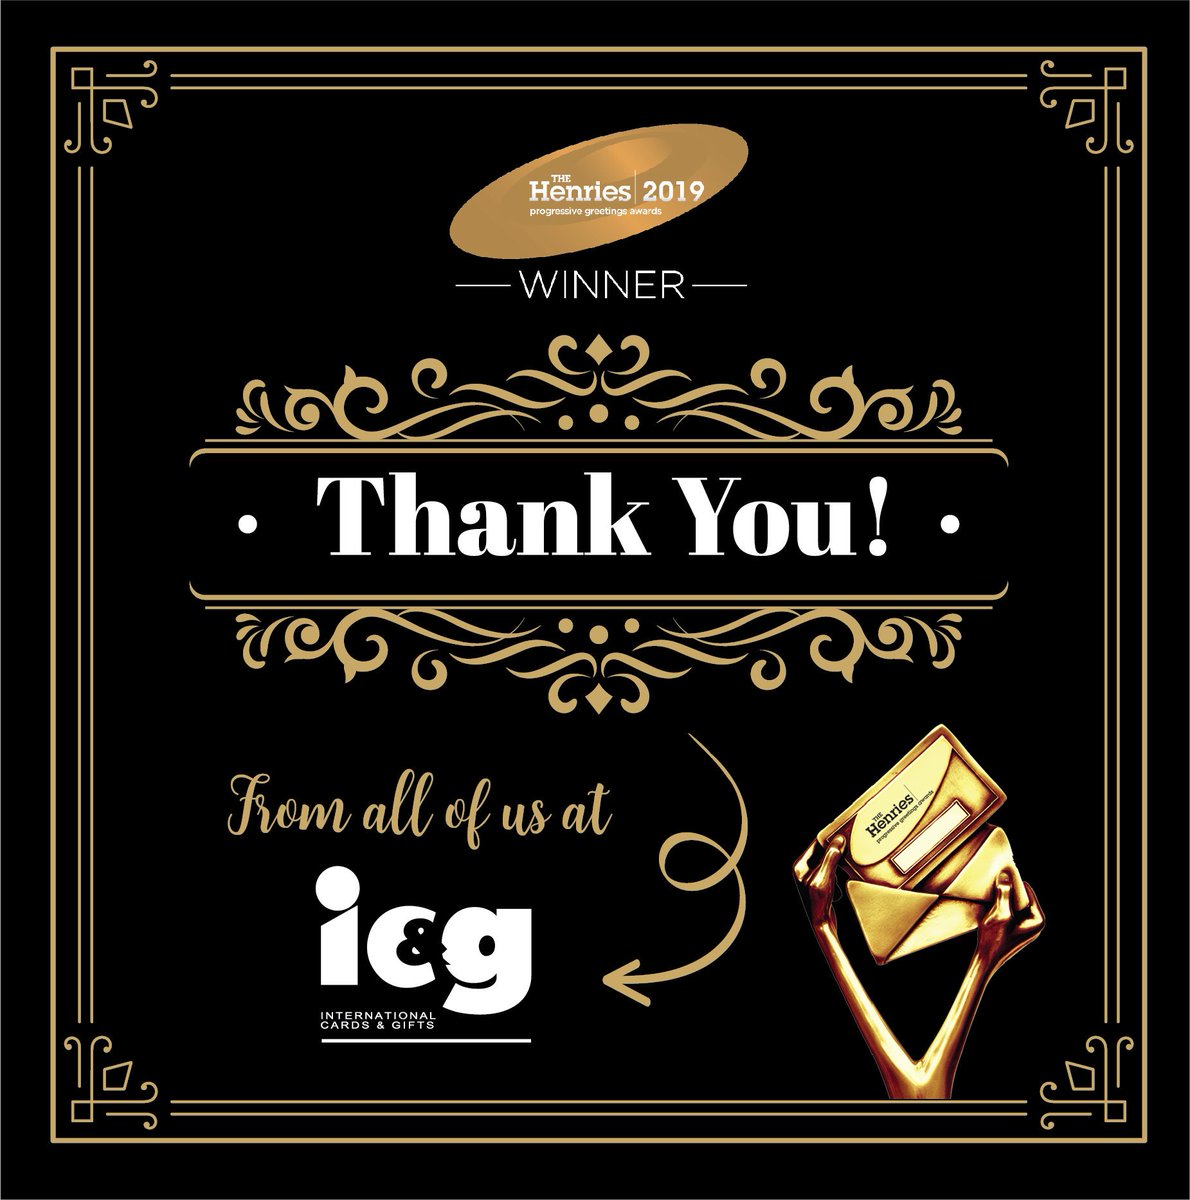 We would like to say a big 'Thank You' to everyone who voted for us this year and enabled us once again to win Gold for the Best Service to the Independent Retailer for the fourth time. Without our wonderful customers, none of this would be possible. So THANK YOU!